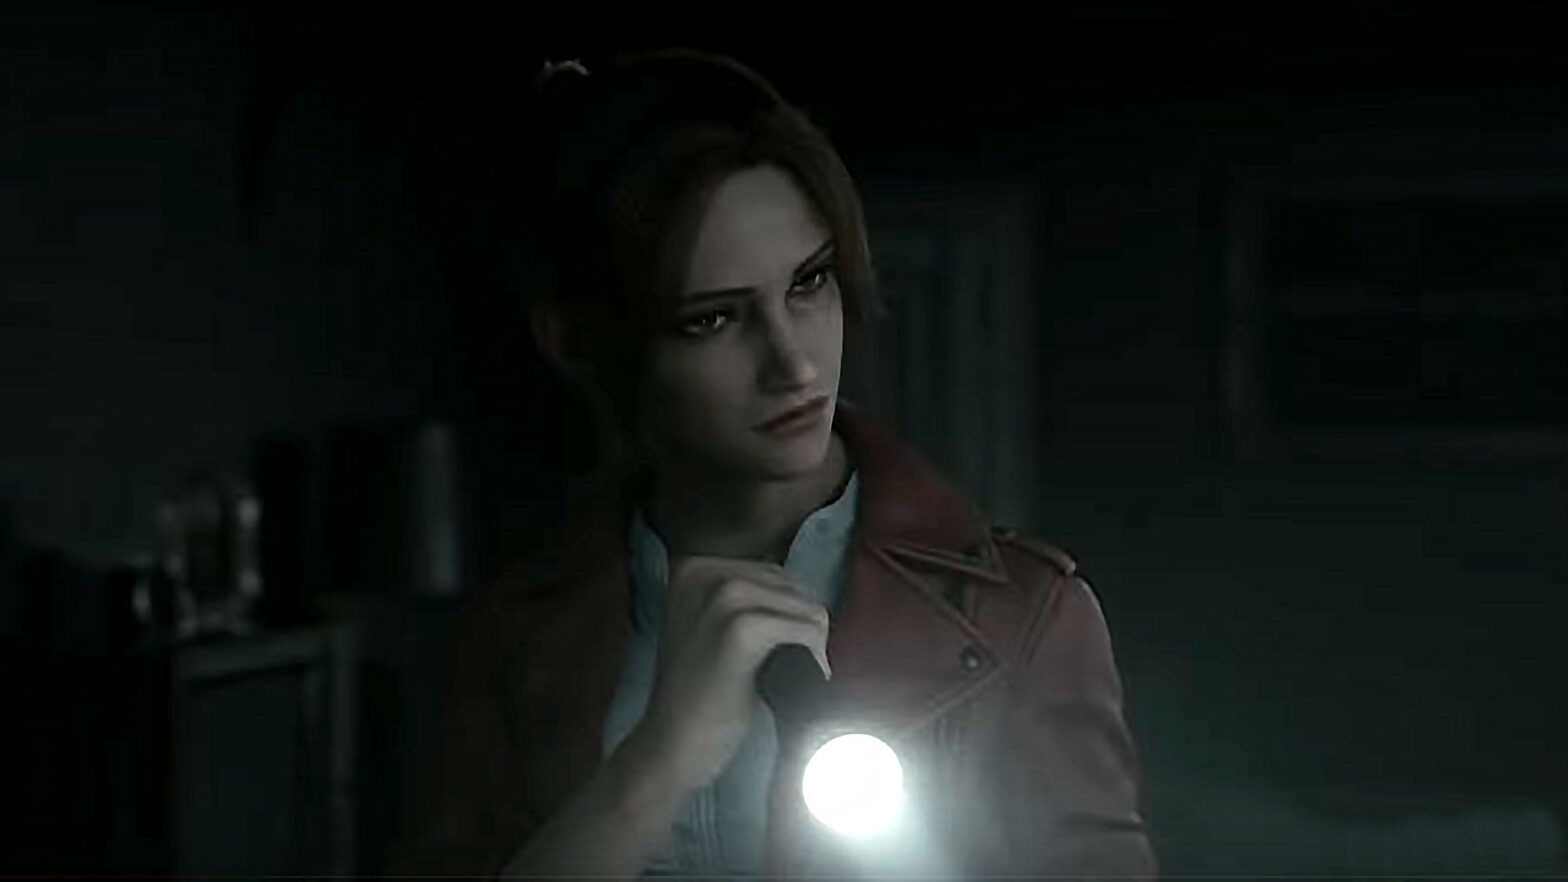 RESIDENT EVIL: Infinite Darkness Special character art featuring